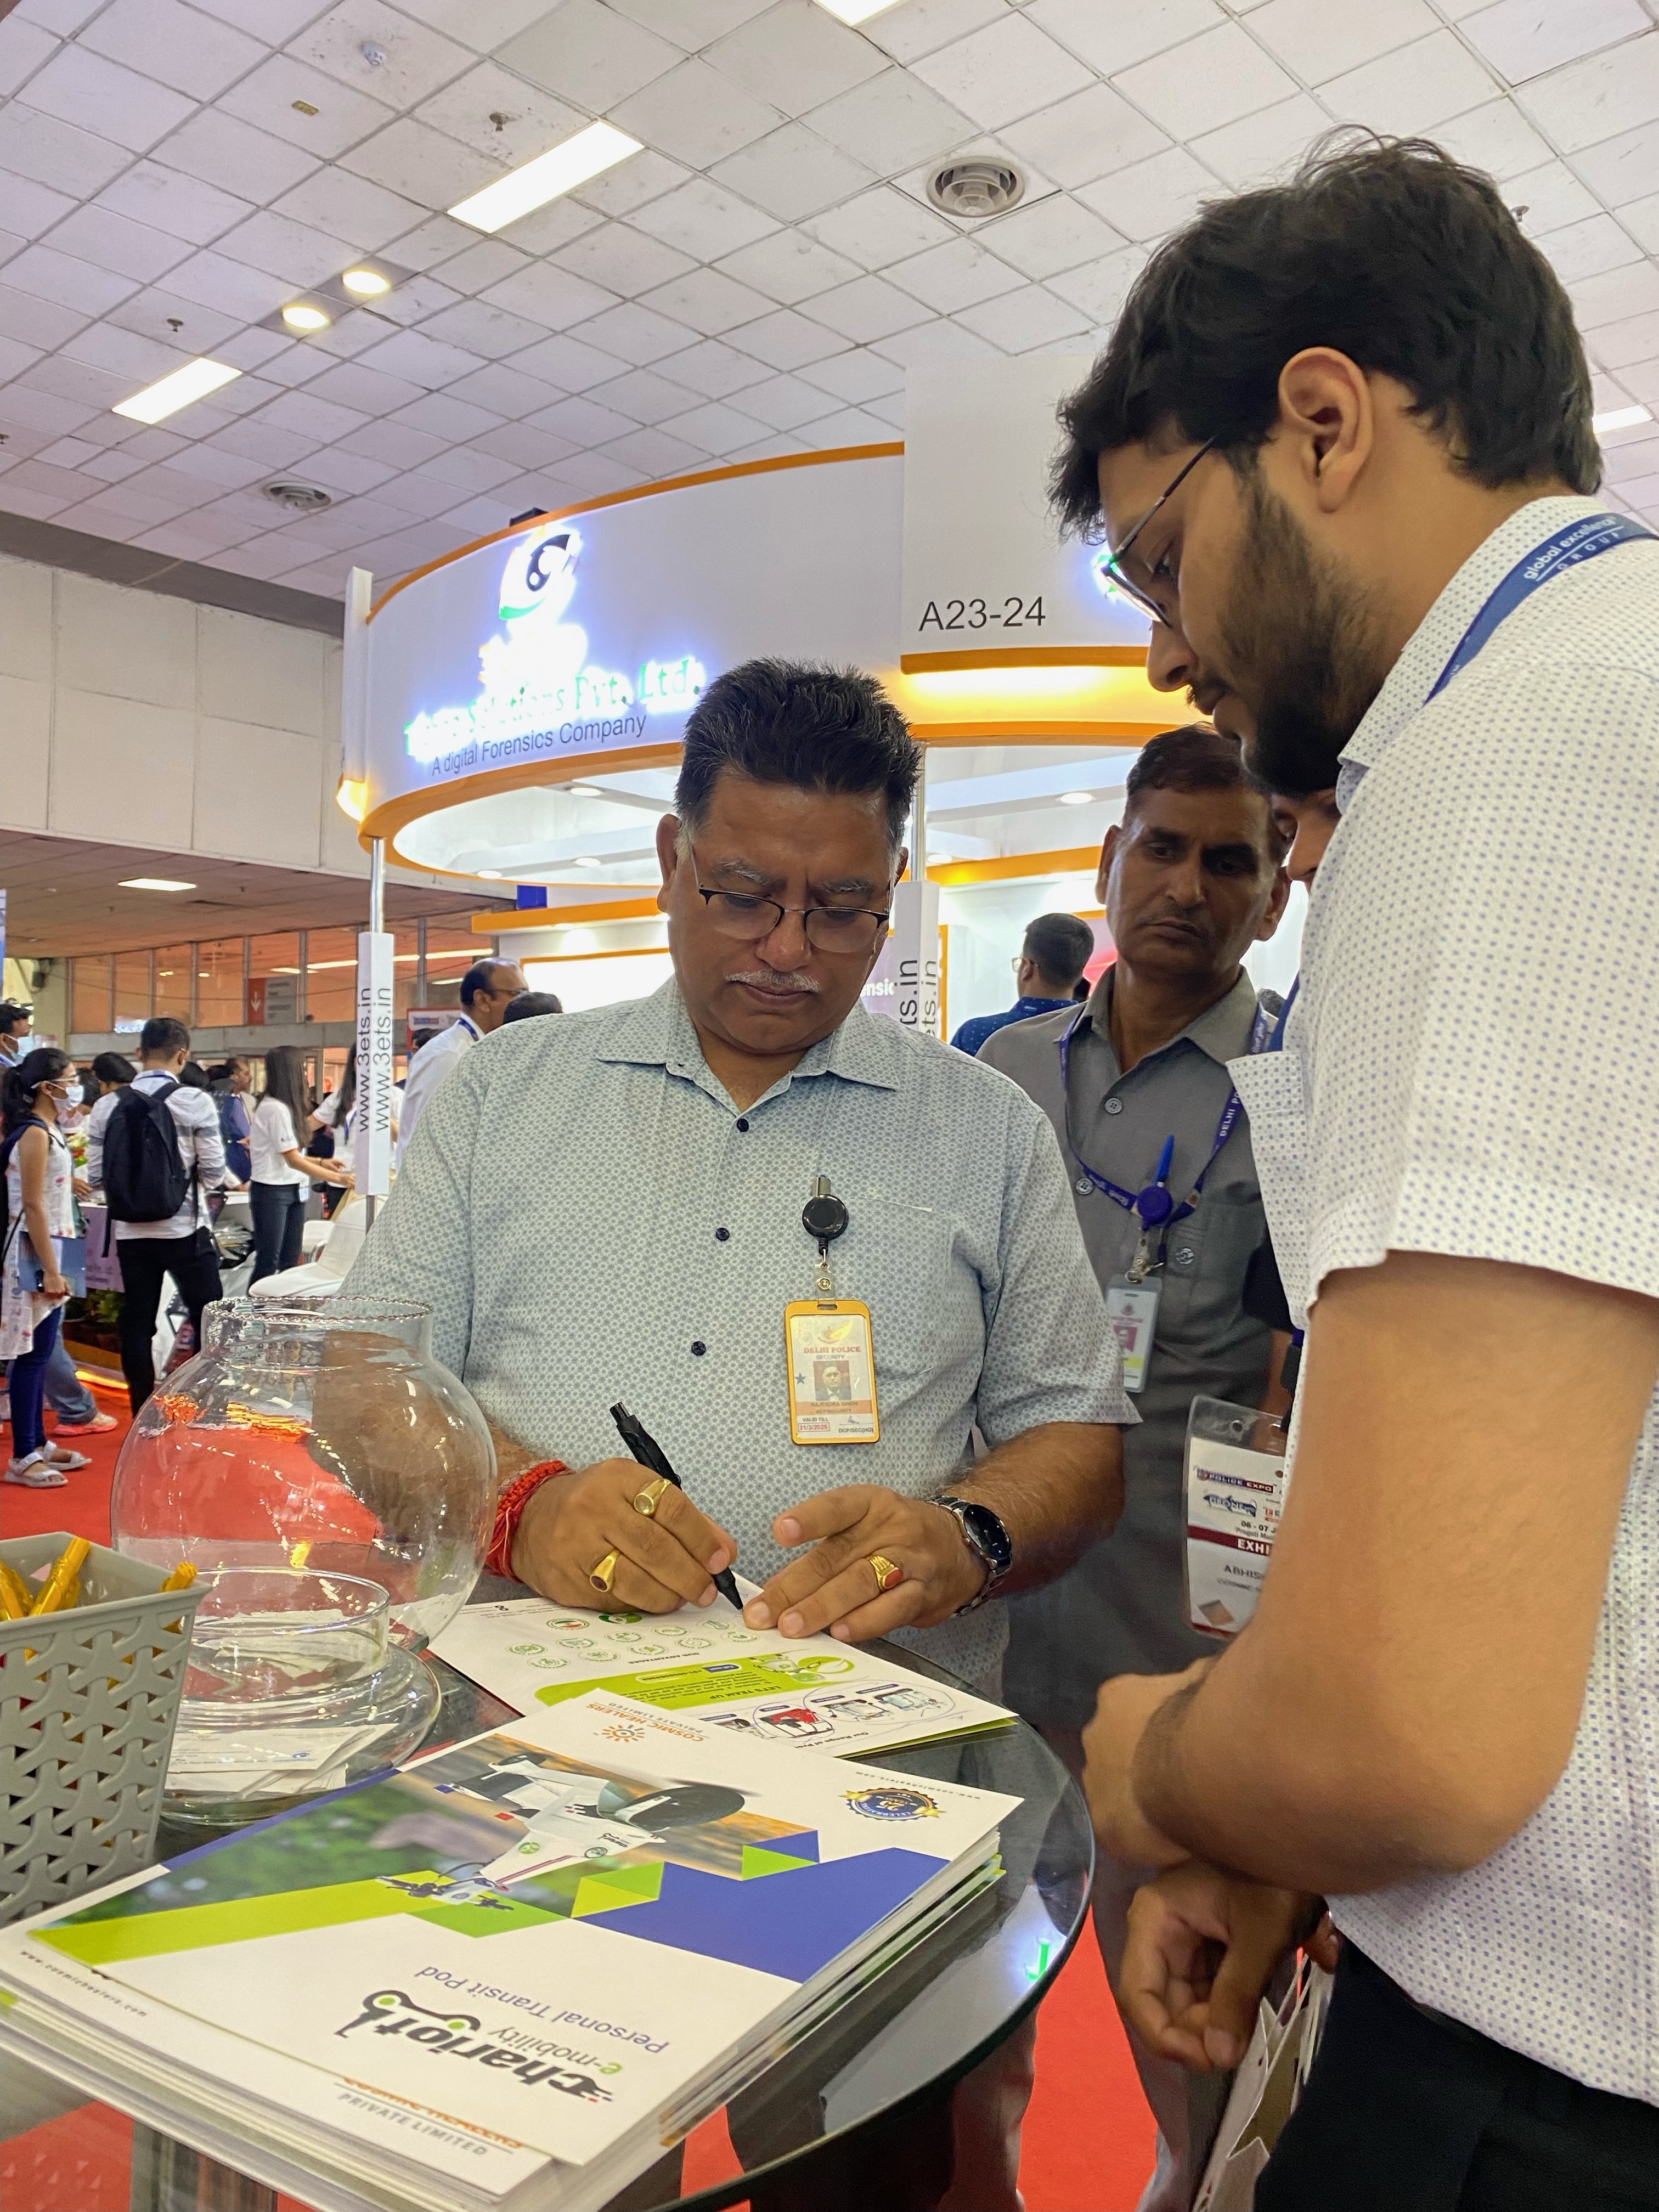 the delegate interacting with the exhibitor